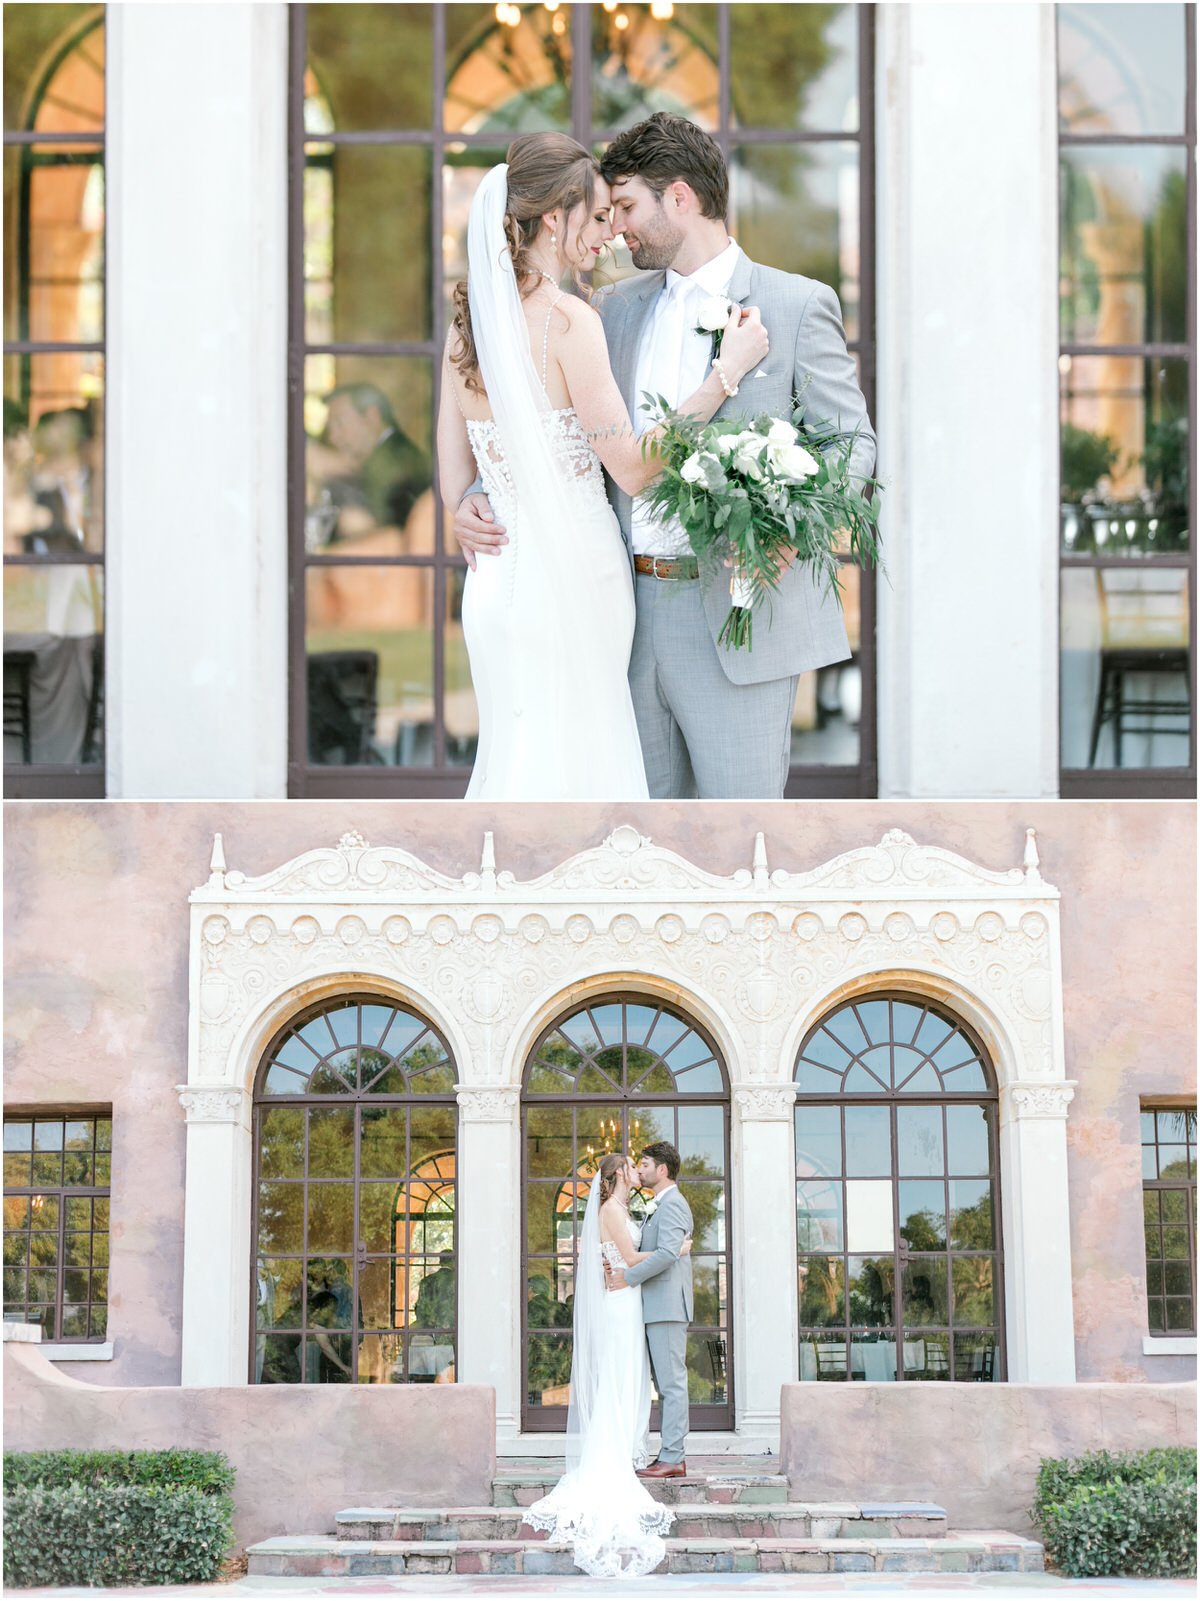 Bride and groom in front of large windows at the Howey Mansion